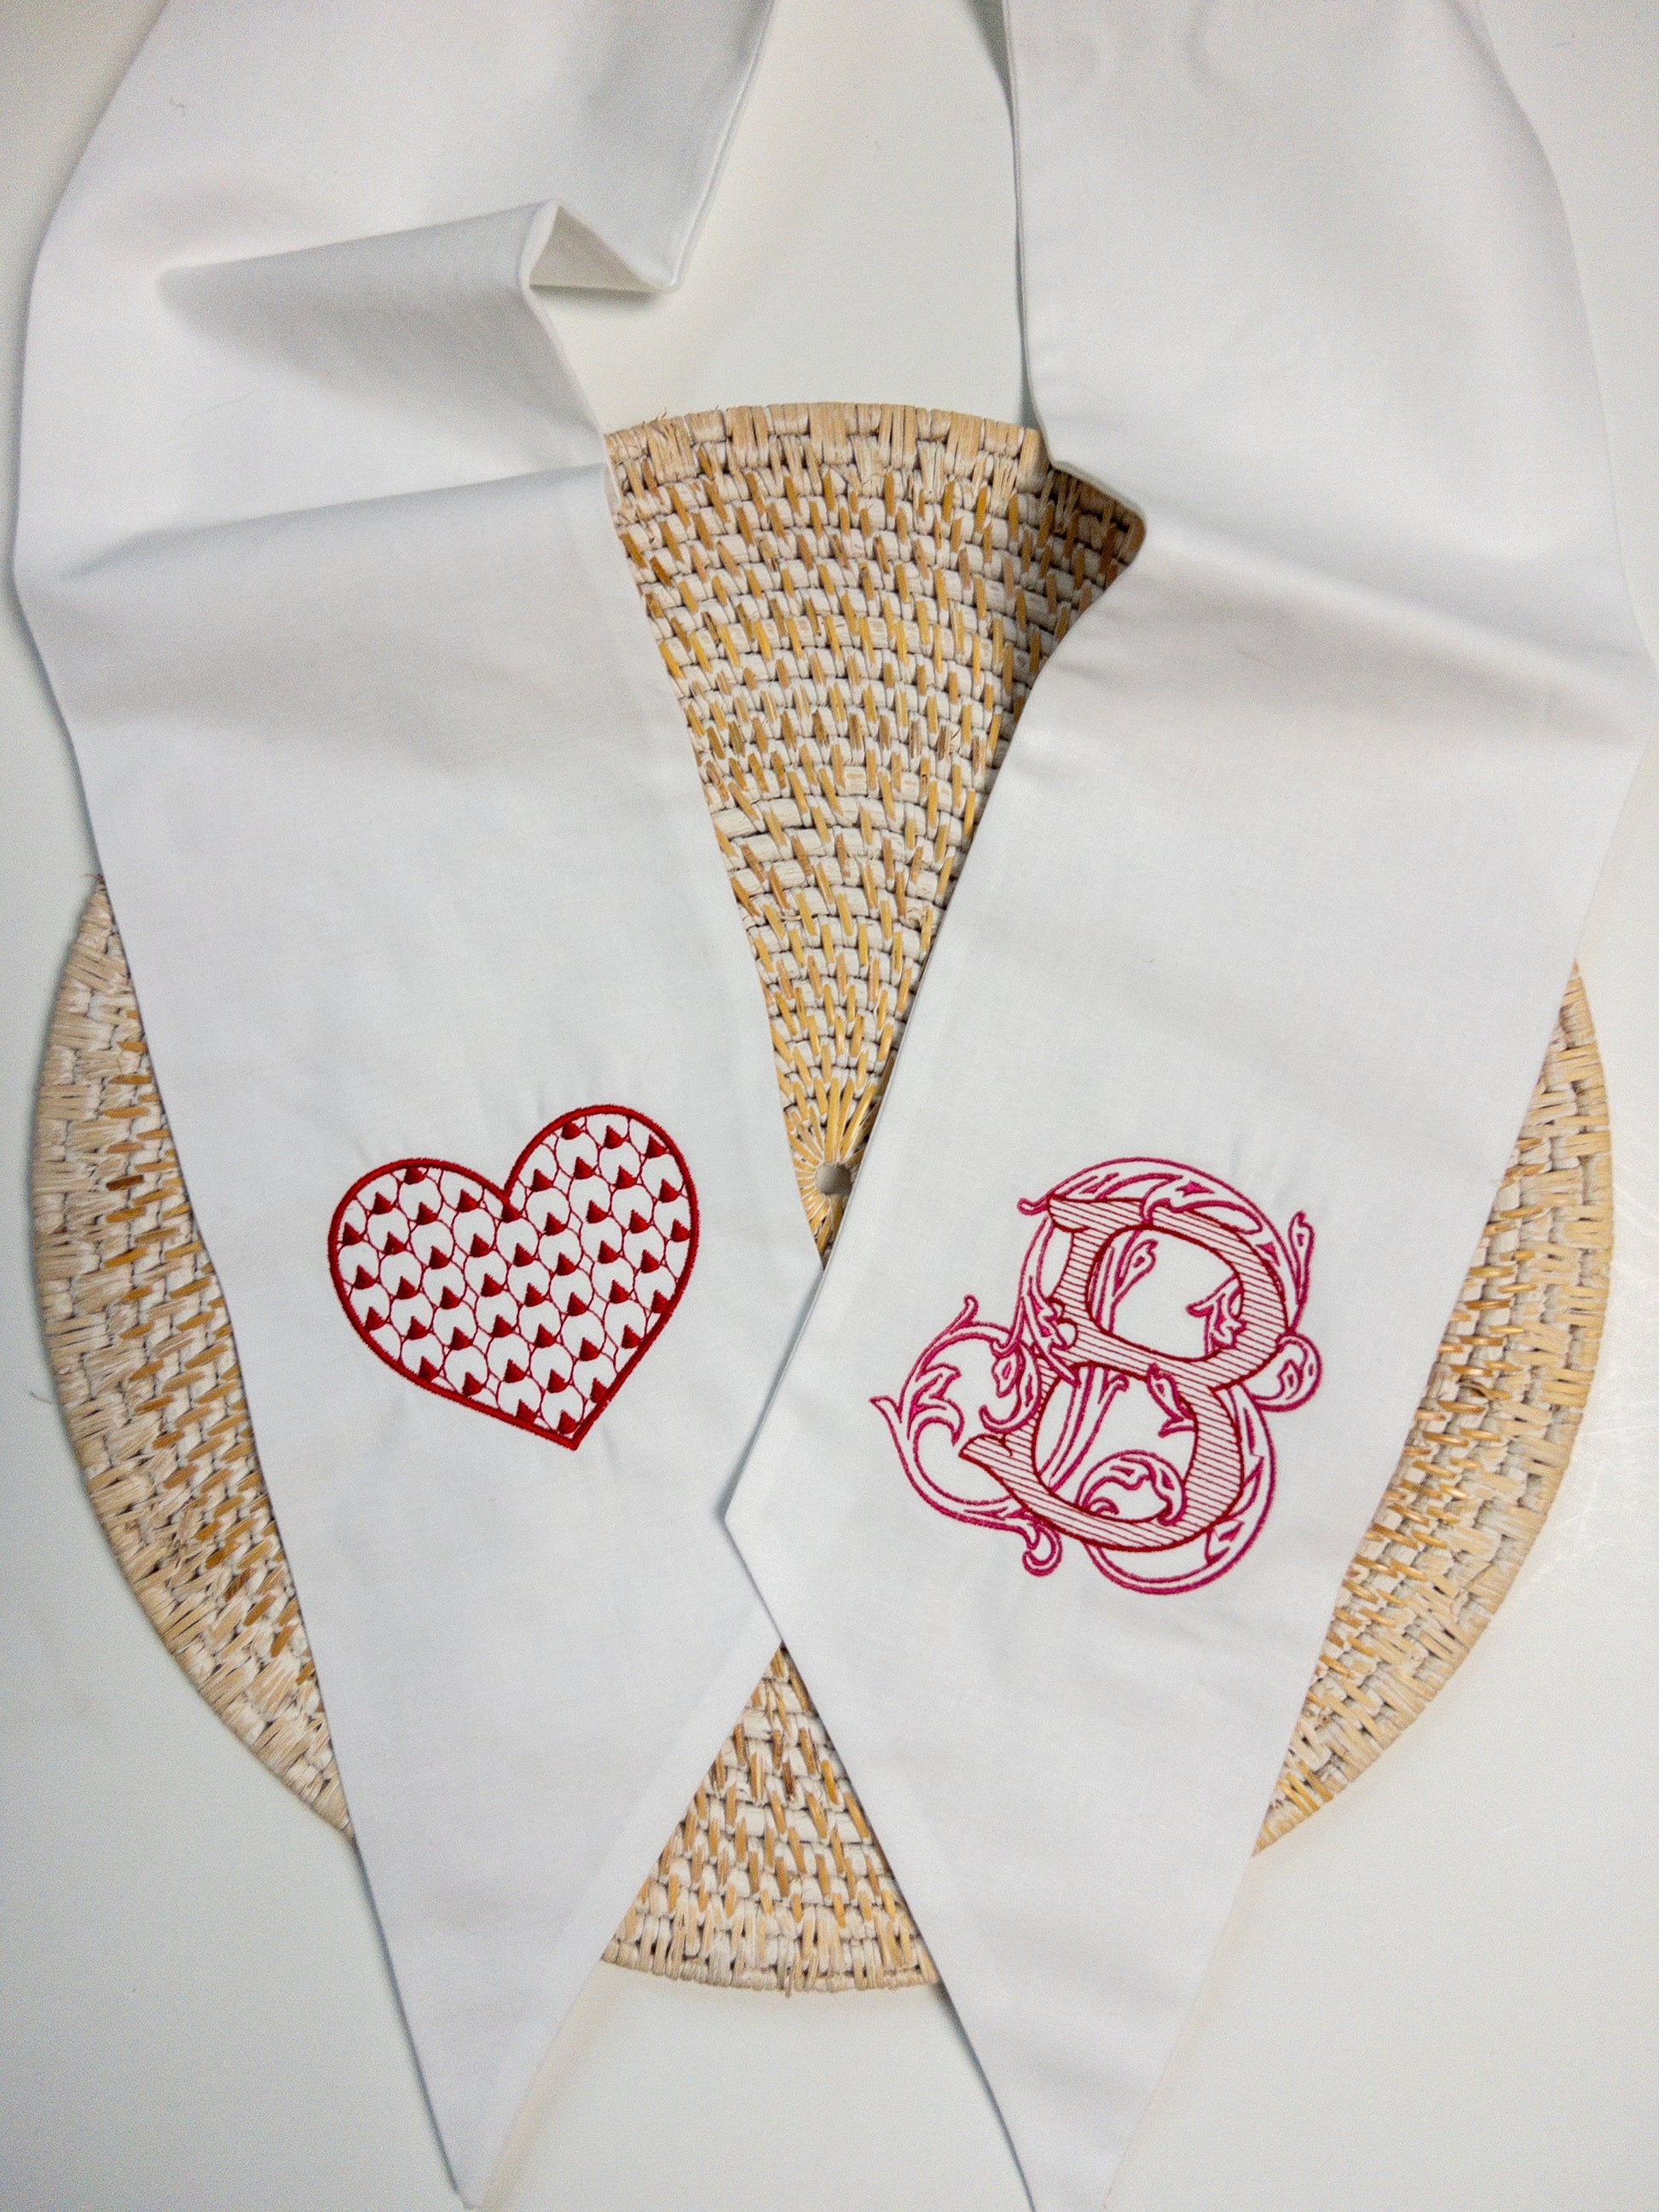 White wreath sash embroidered with a red heart on one end and a fancy monogram on the other side in pink and red thread.